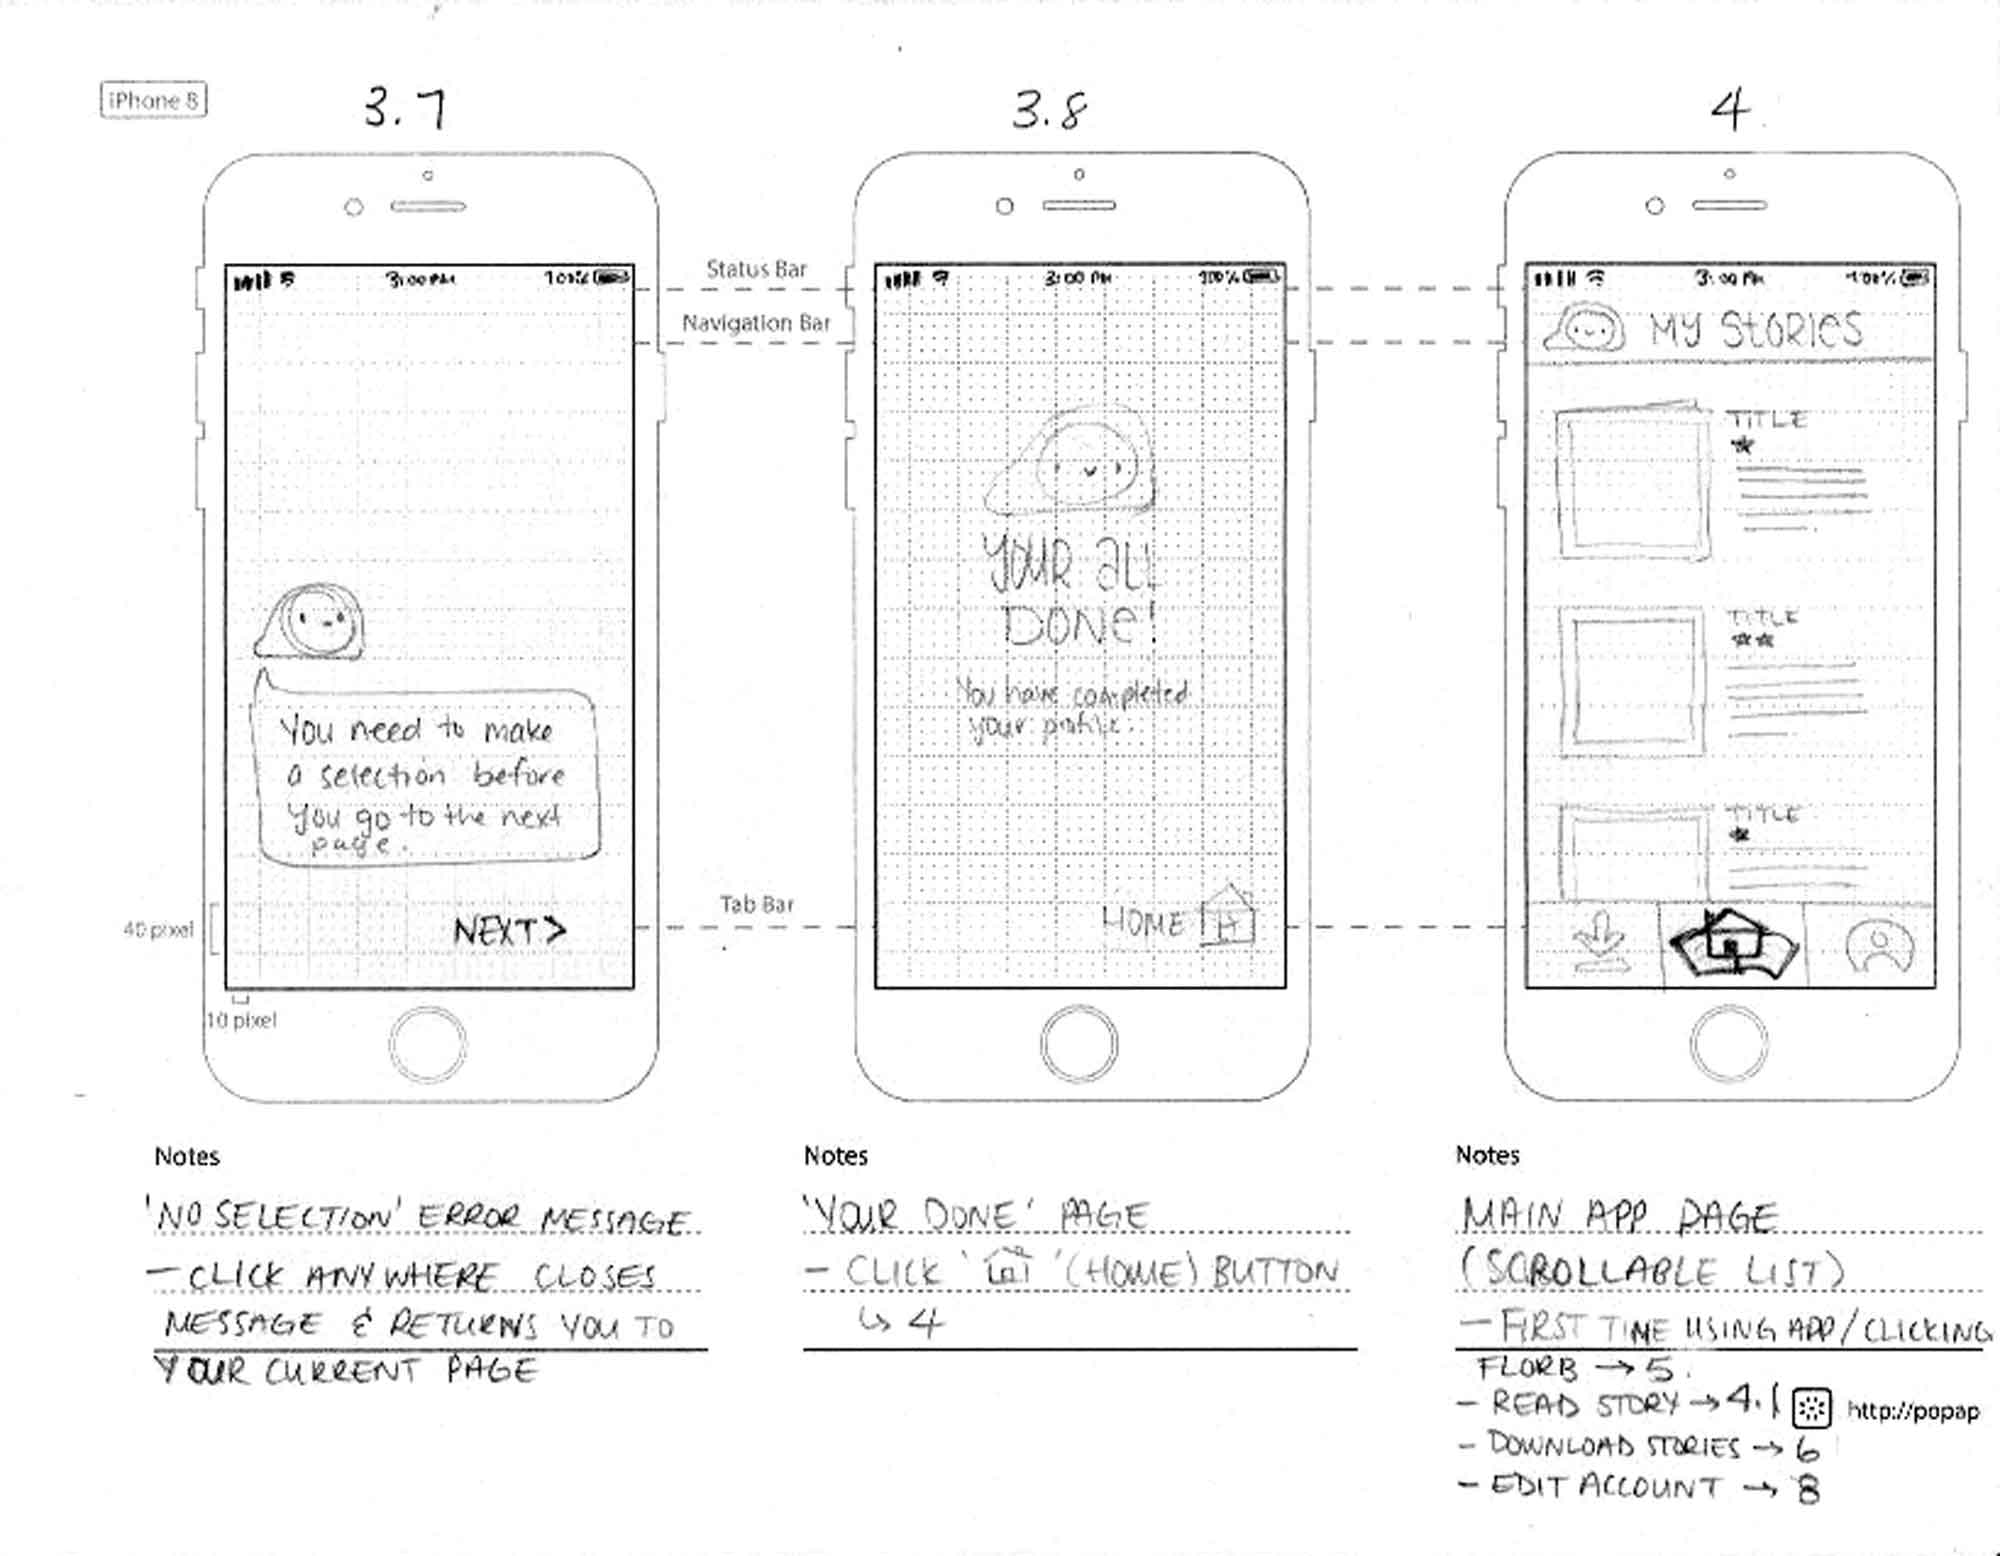 This is an image of some app sketches for the main home app screens.
